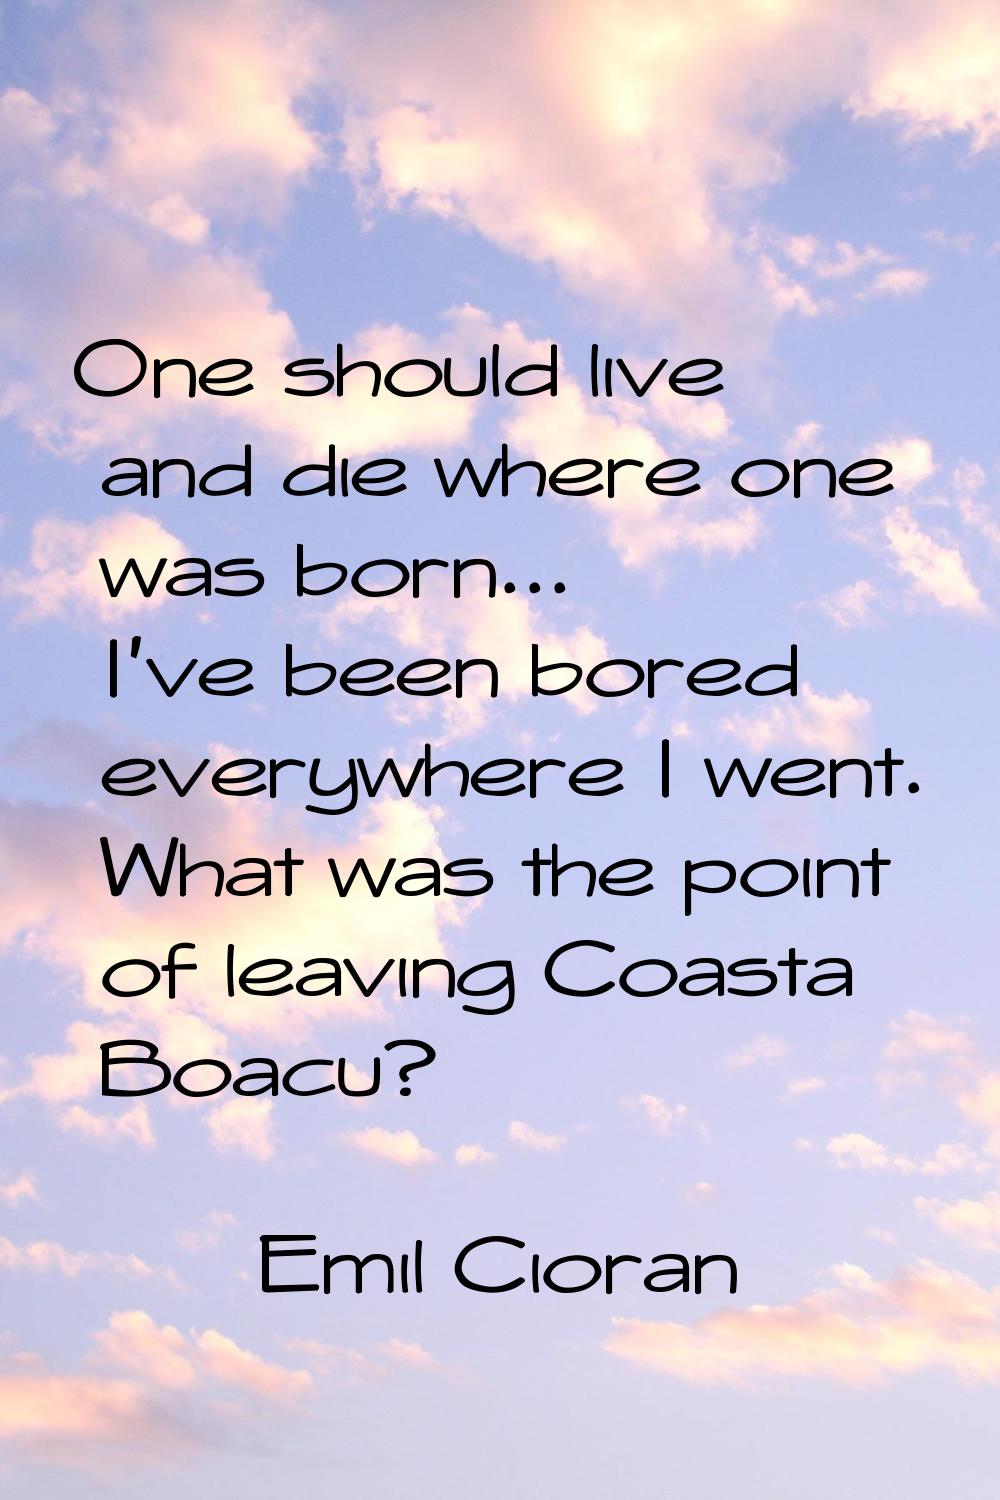 One should live and die where one was born... I've been bored everywhere I went. What was the point